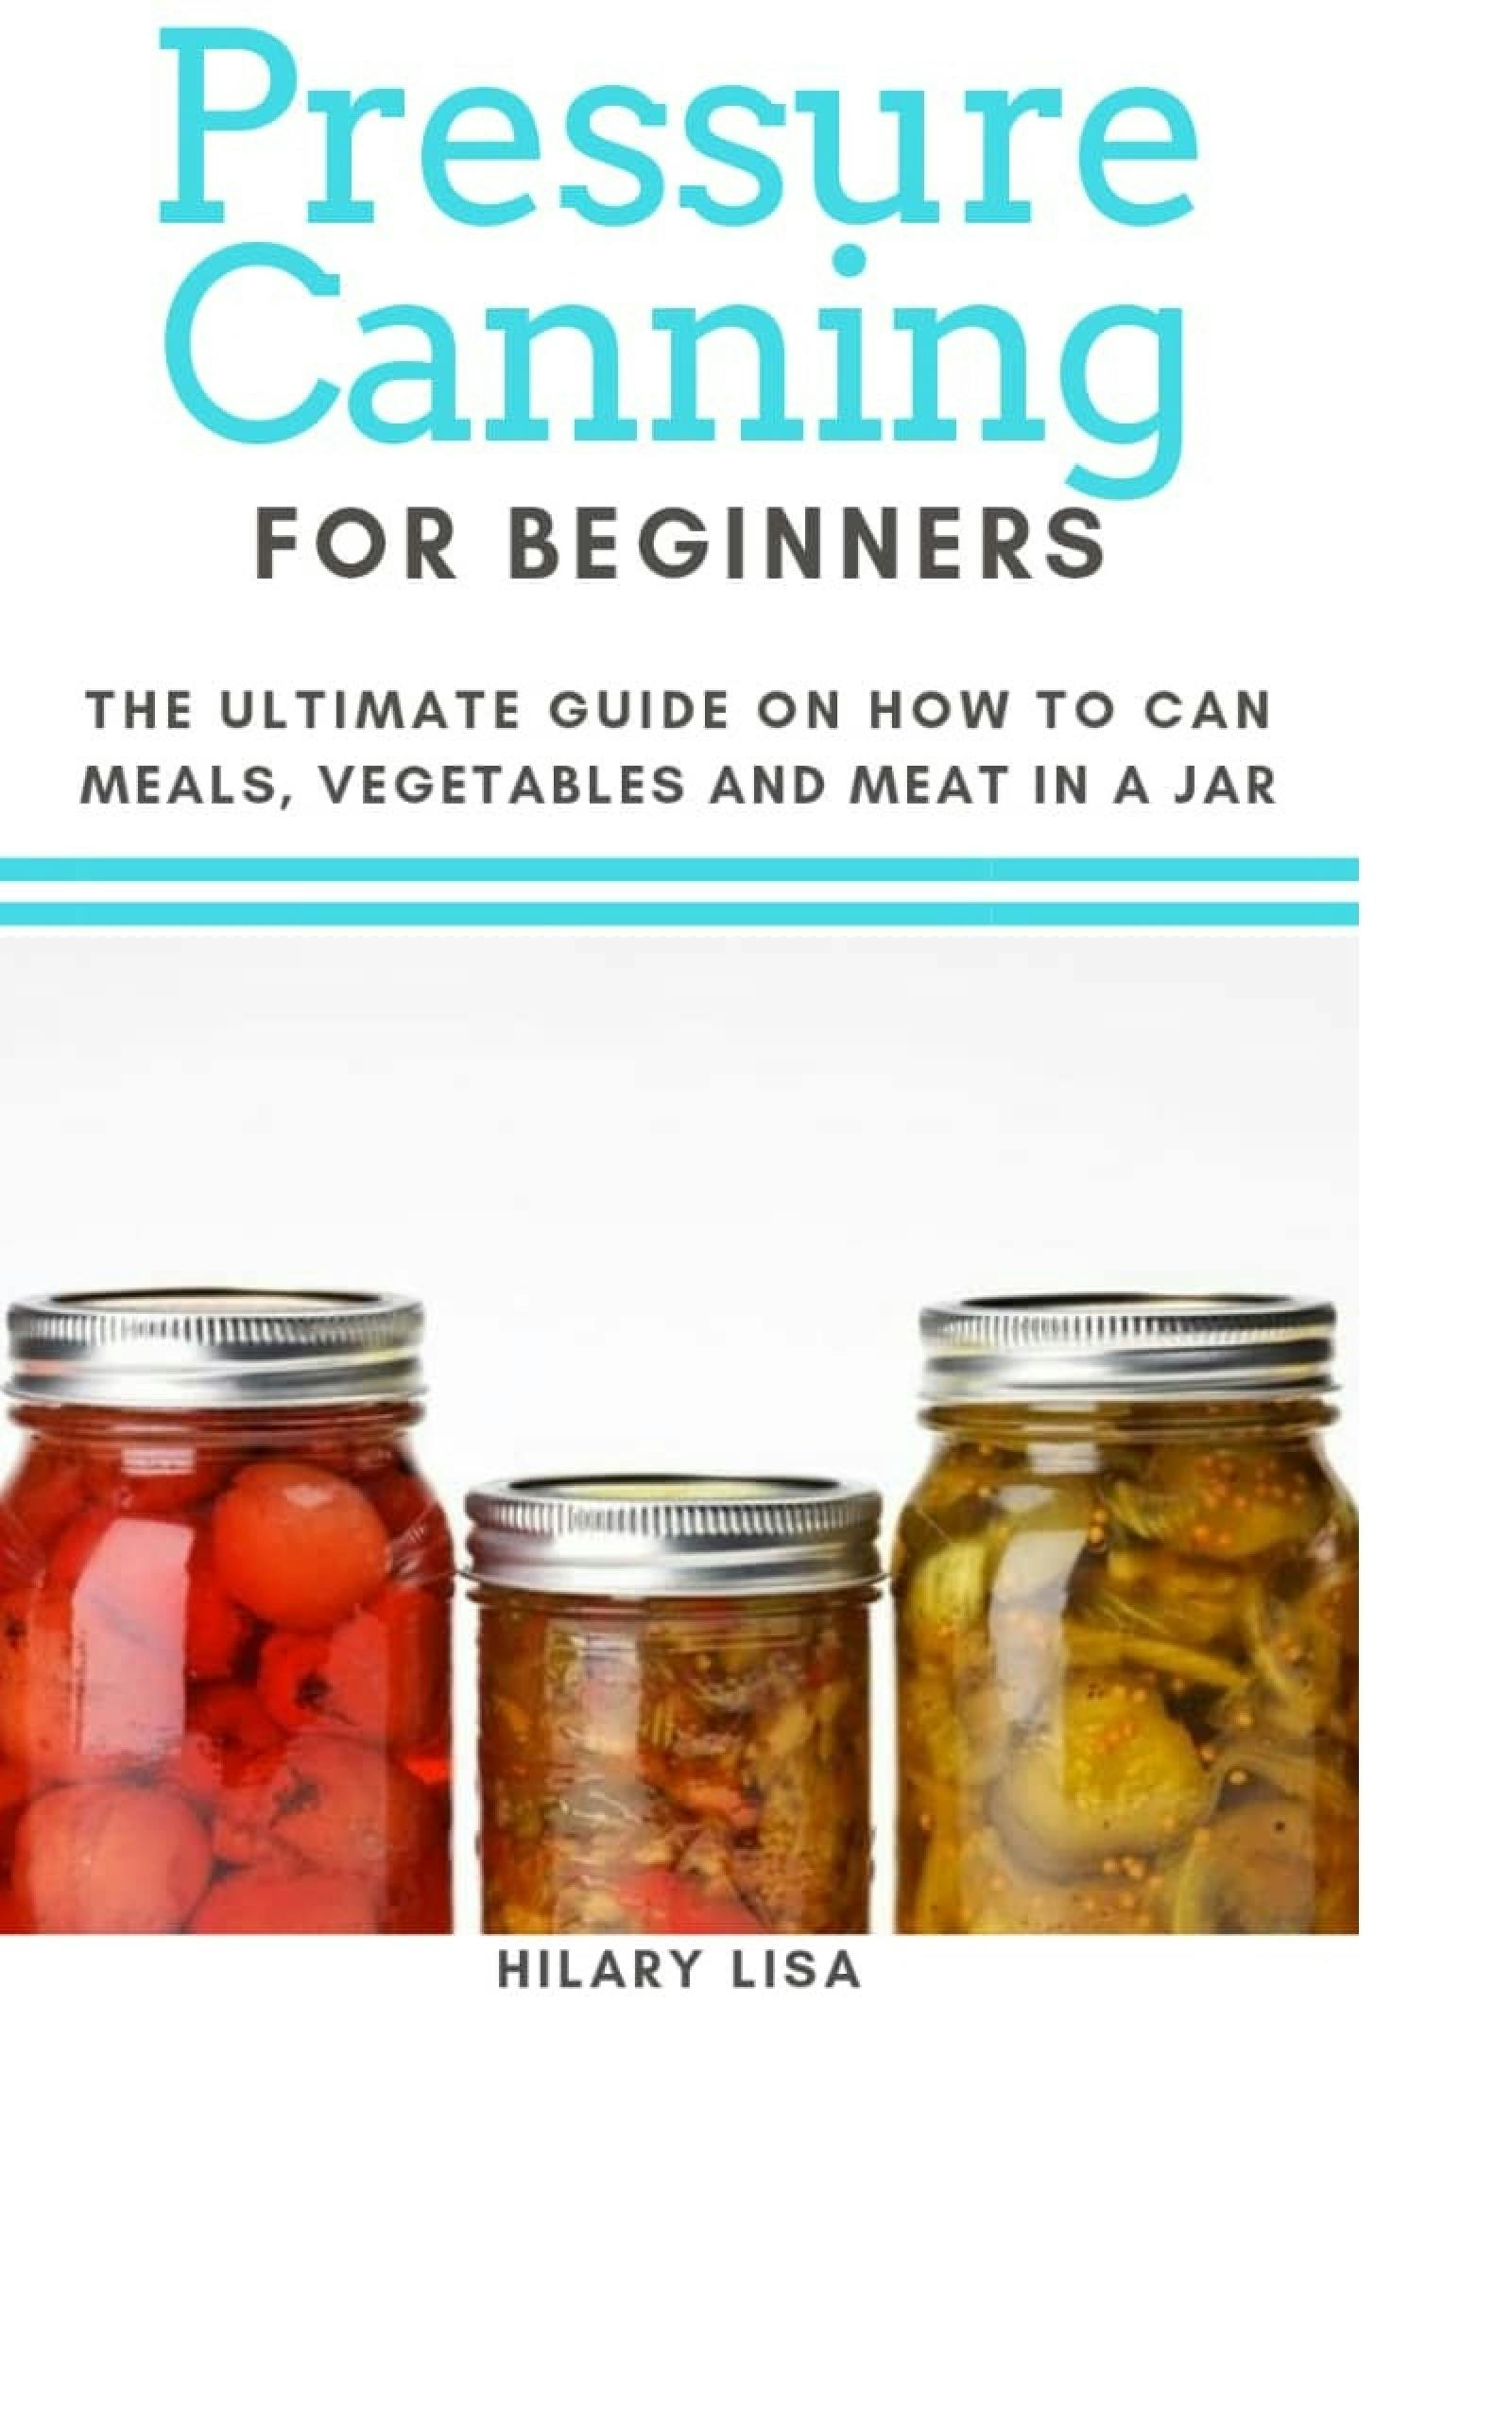 Pressure Canning for Beginners - Hilary Lisa